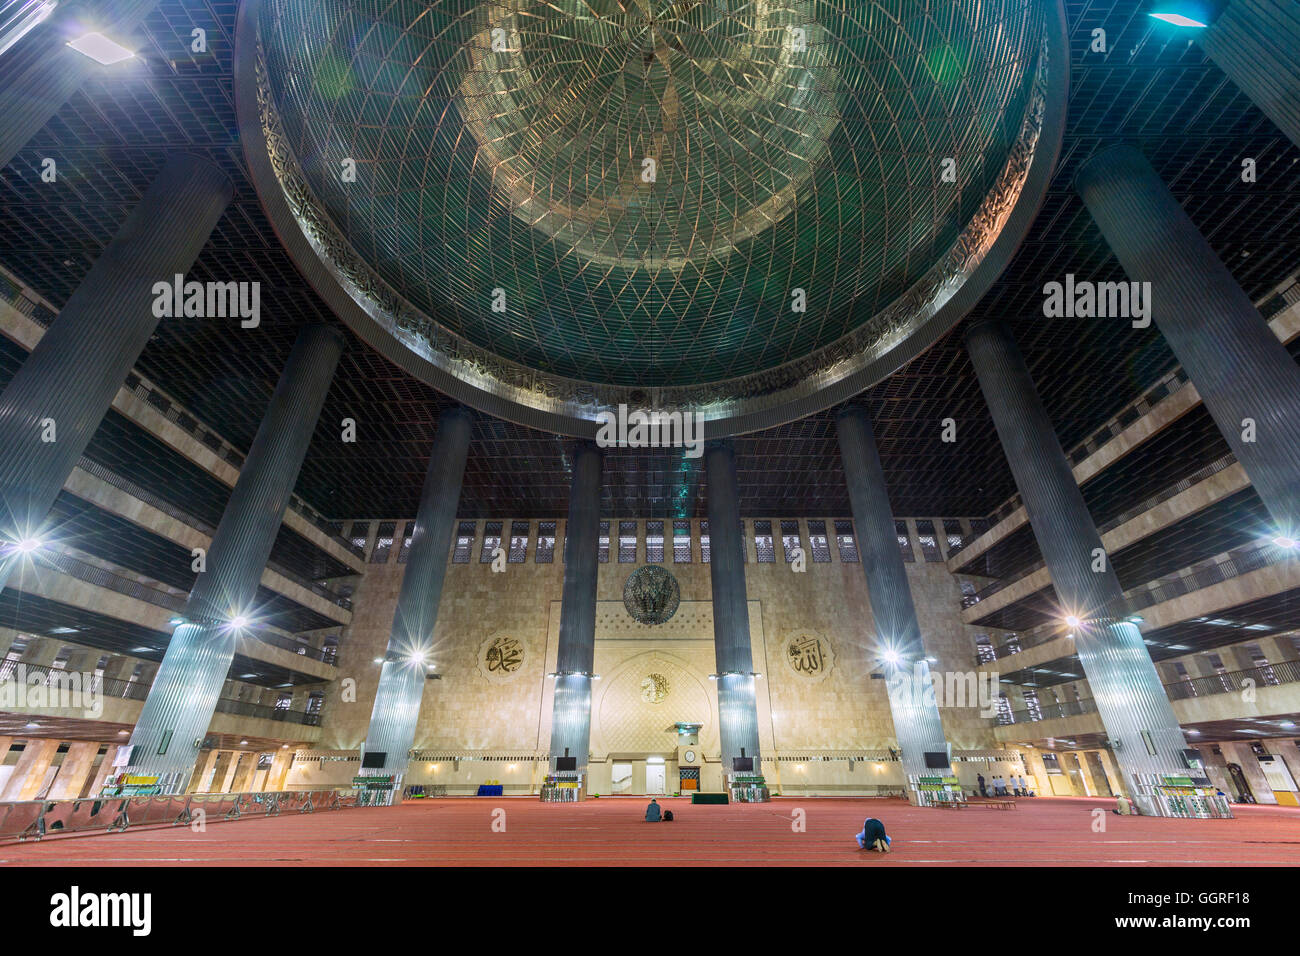 Interior of Istiqlal Mosque, or Masjid Istiqlal, (Independence Mosque) in Jakarta, the largest mosque in South East Asia Stock Photo